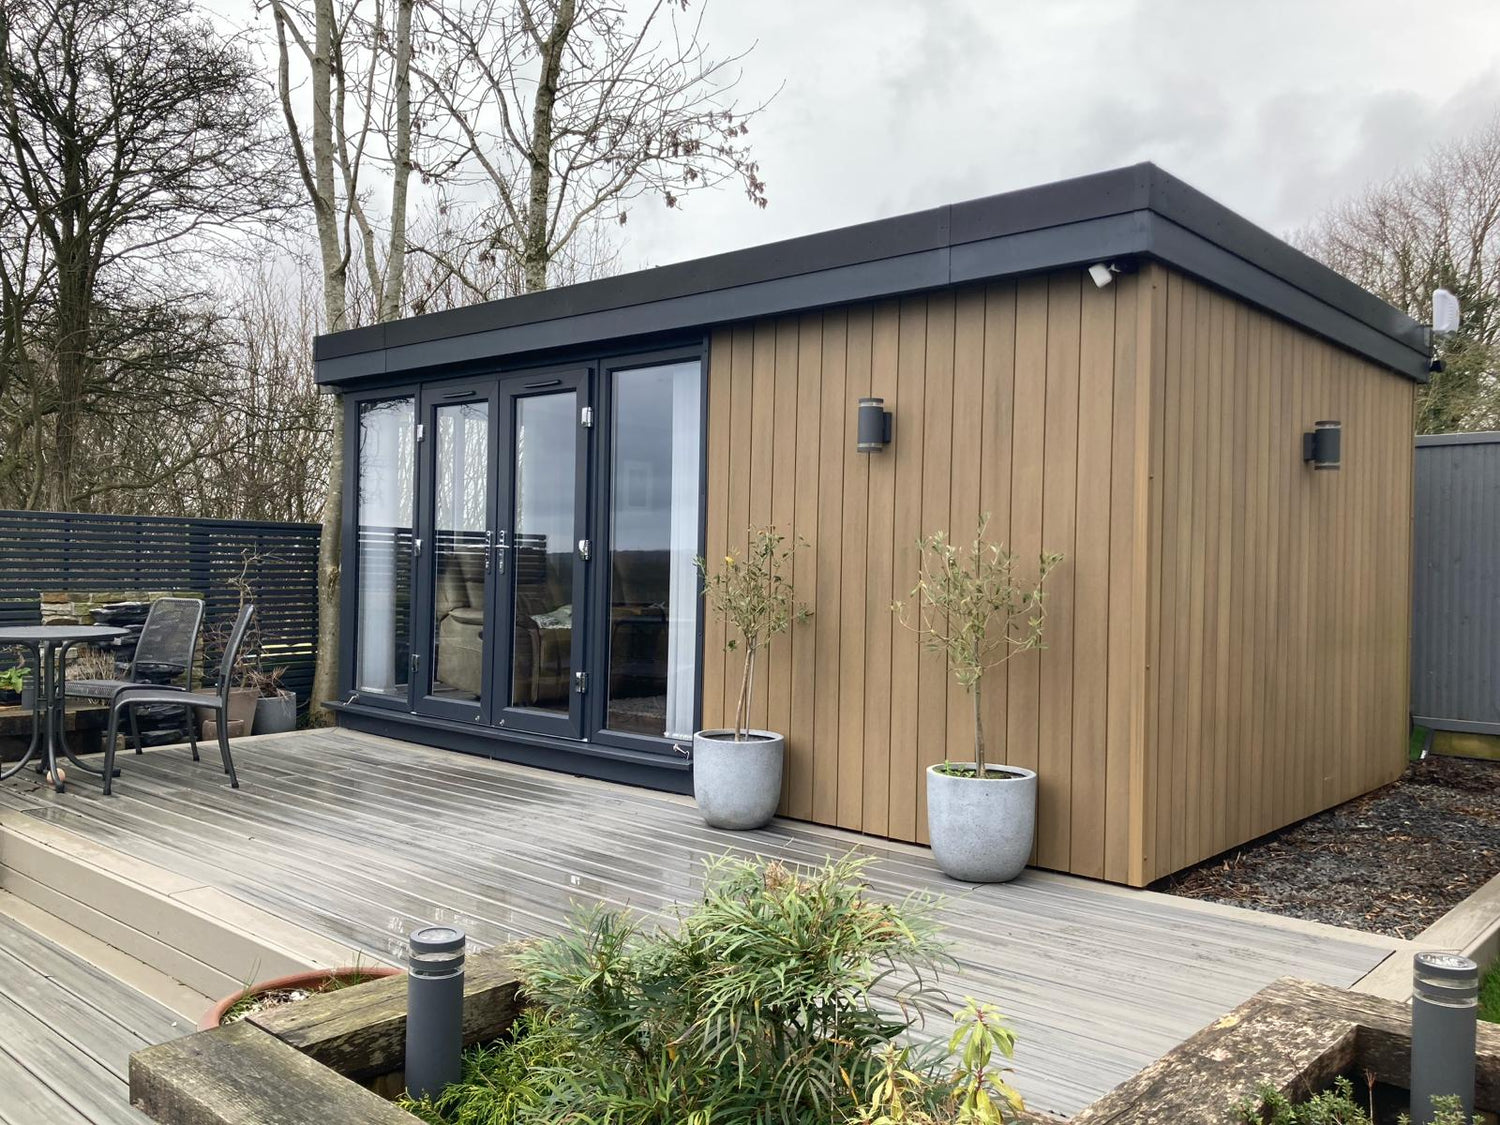 Garden Room finished in Oak Composite Cladding, with French Doors and Long Fixed Panoramic Windows.